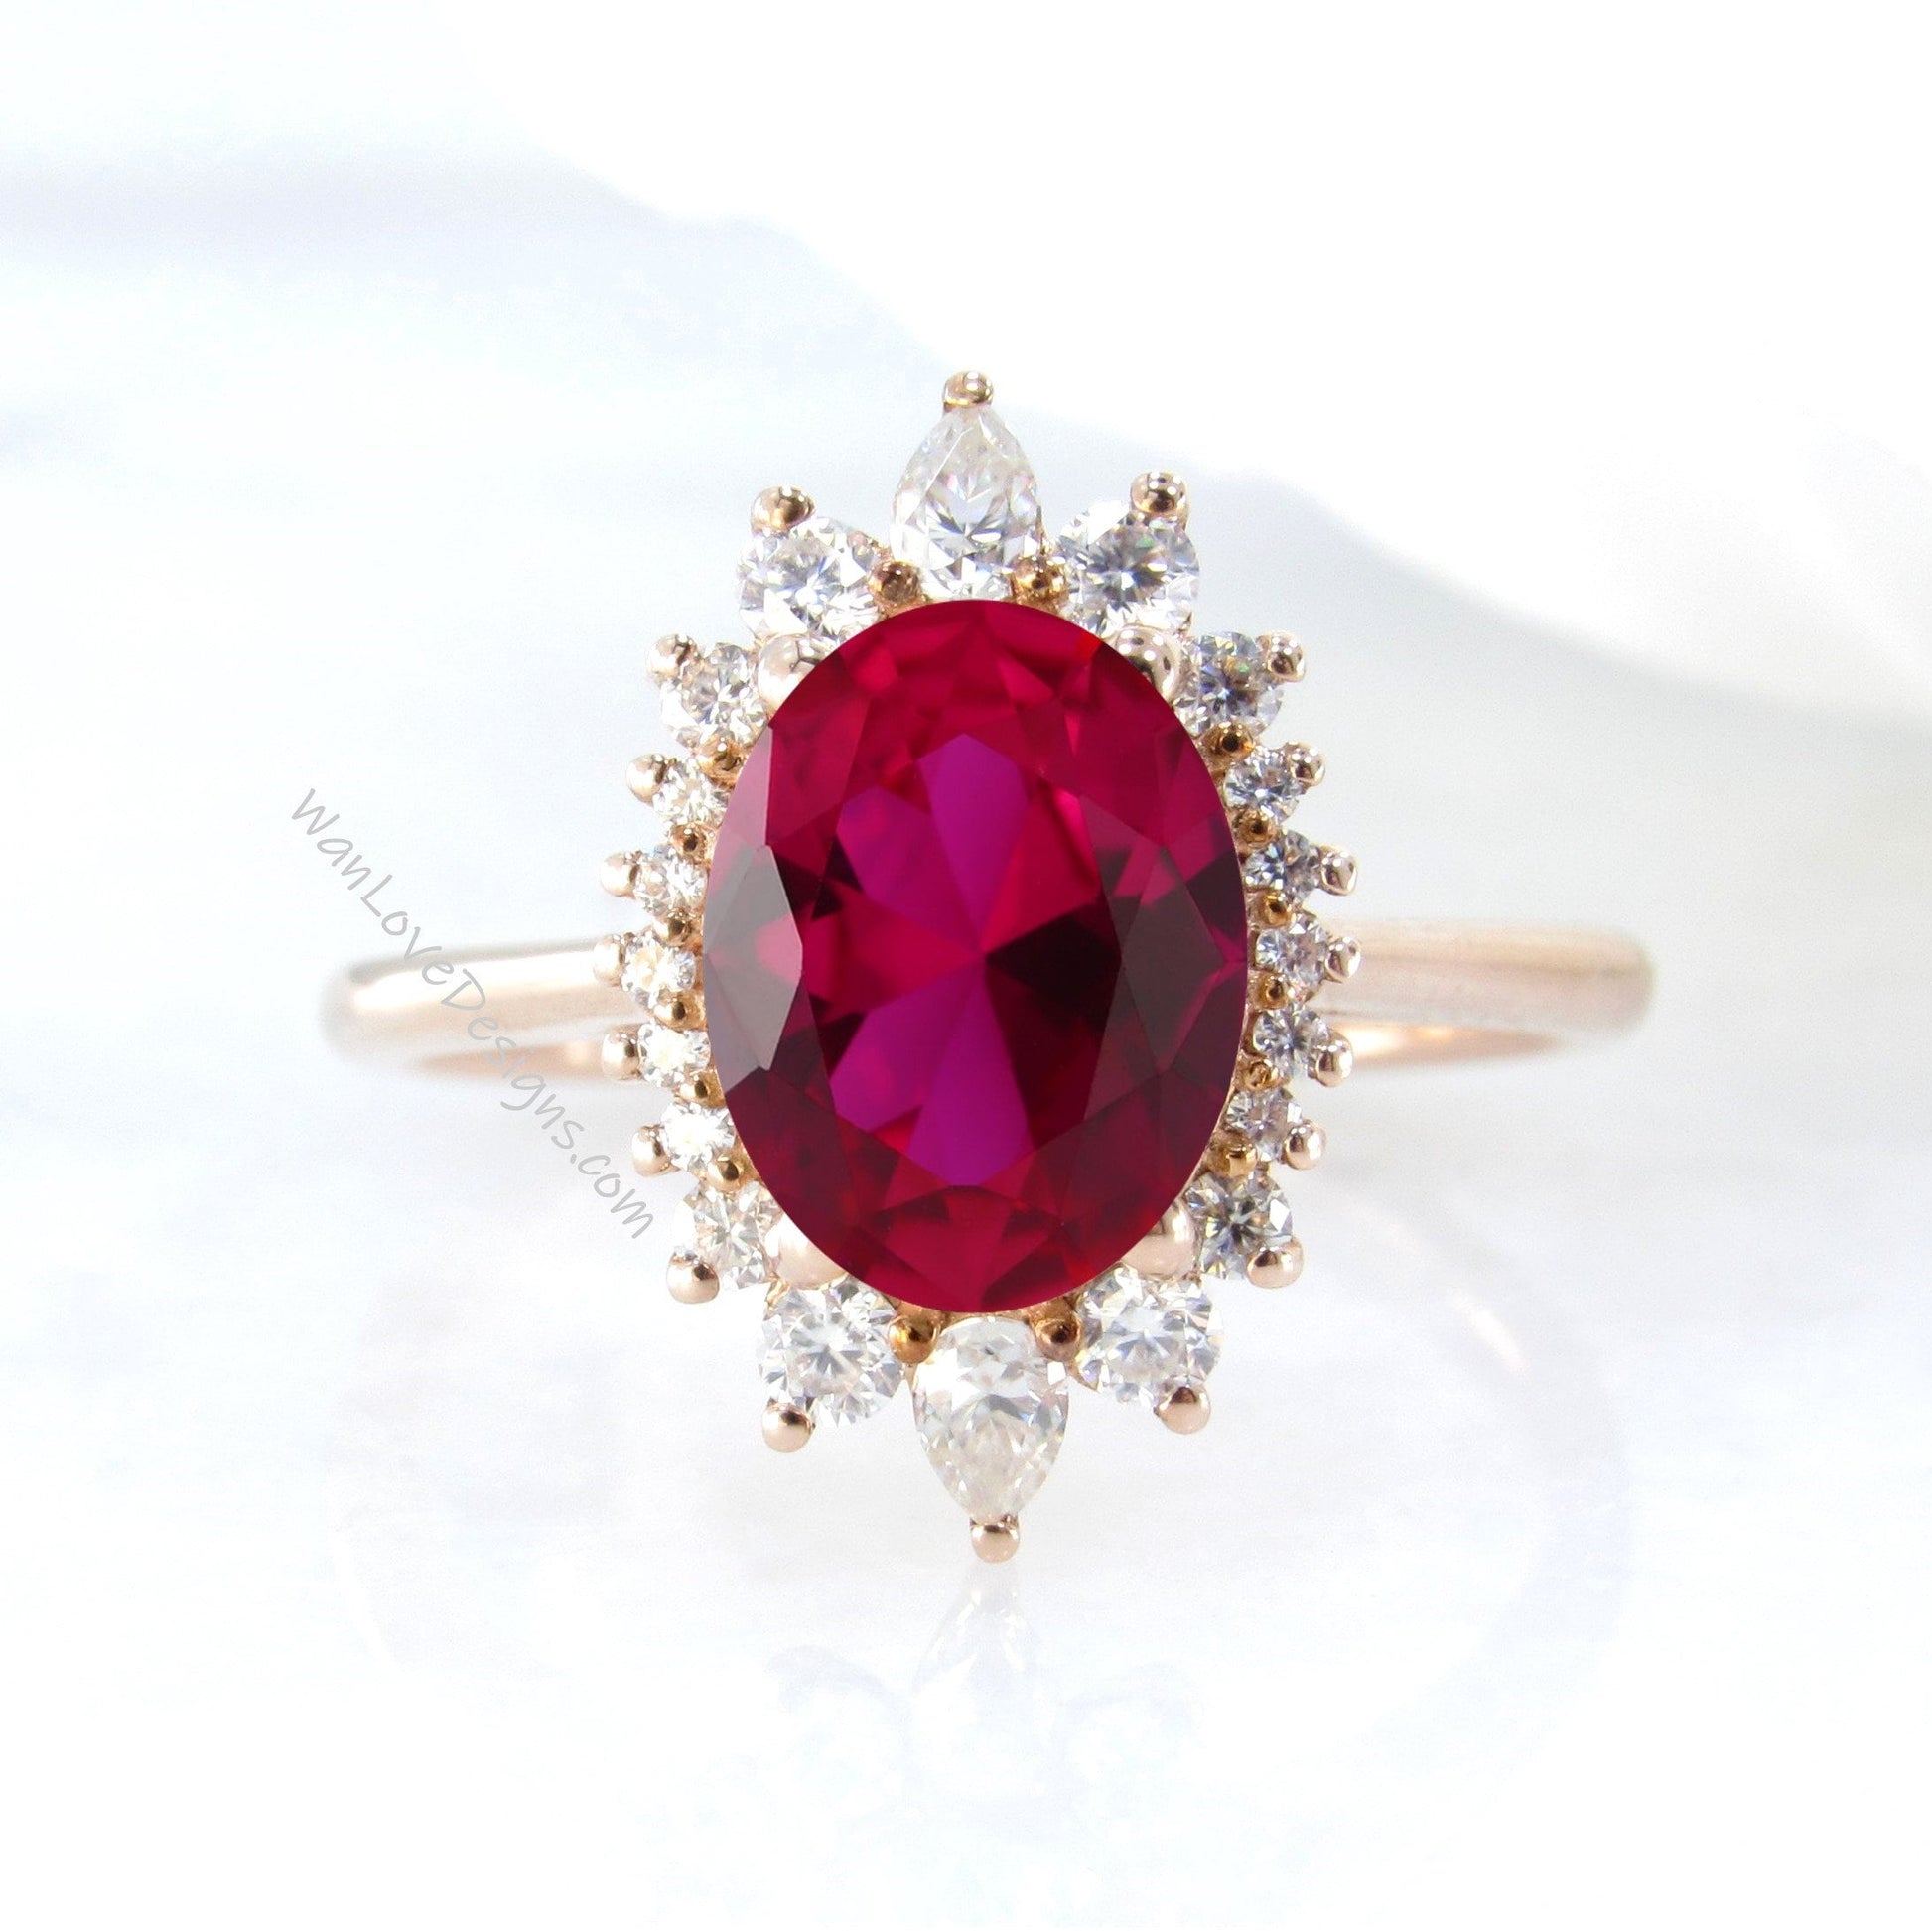 Halo Oval Ruby Engagement Ring, Halo Oval Moissanite Engagement Ring, Rose Gold Oval Cluster floral Ring, Anniversary Diamond Ring Wan Love Designs